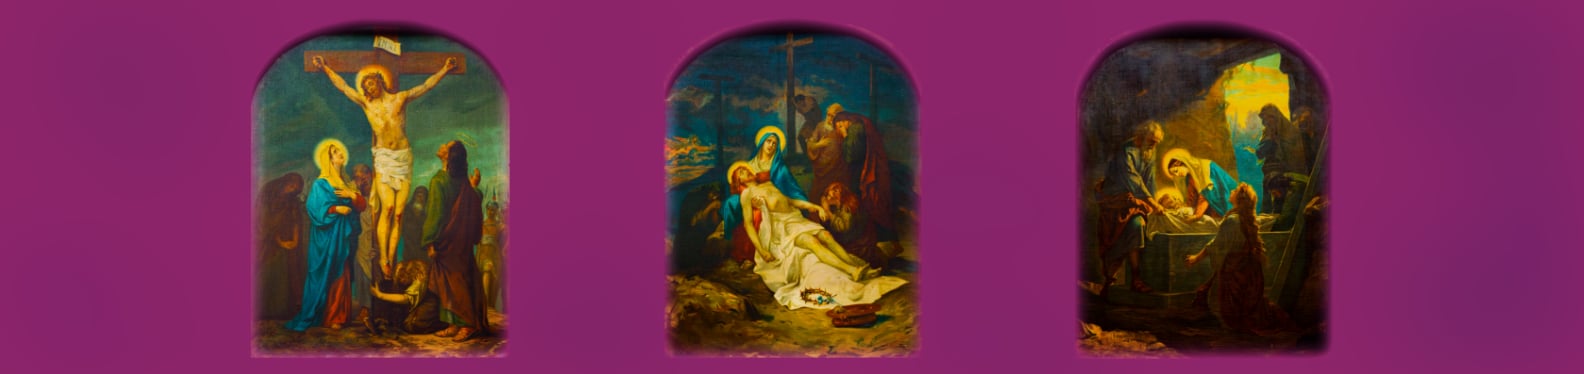 Stations of the Cross Showing 3 images: Jesus on the Cross, Jesus taken down from the Cross held by Mary, Jesus in the Tomb